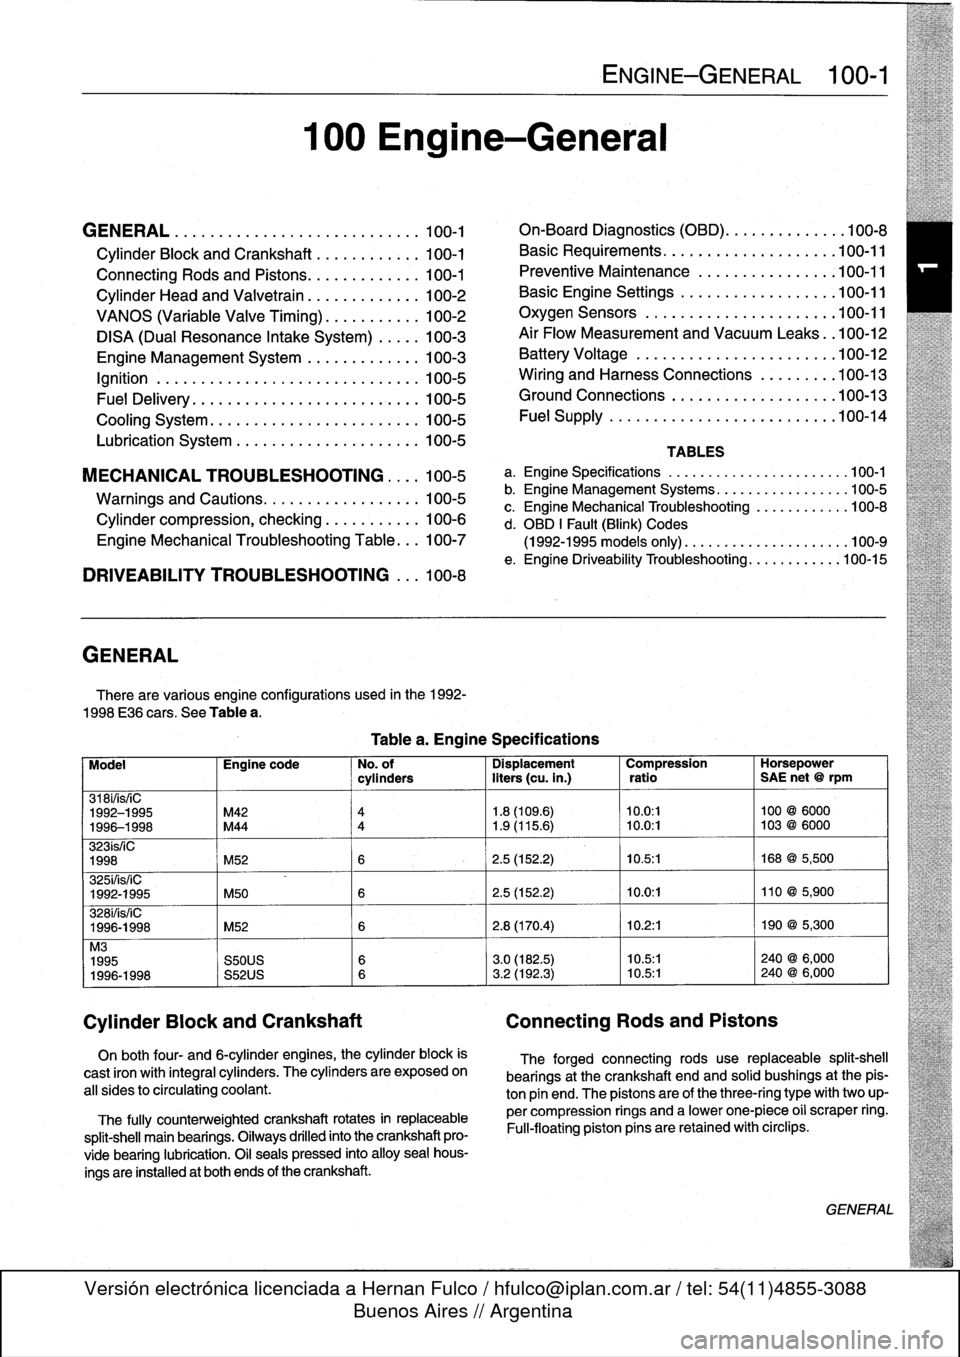 BMW M3 1992 E36 Workshop Manual 
GENERAL
.
.....
.
.
.
.
.
.
.
...
.
.
.
.
.
.
.
.
.
...
100-1

Cylinder
Block
and
Crankshaft
.
.
.
.
.
.
.
.
.
...
100-1

Connecting
Rods
and
Pistons
.
.
.
.
.
.
.
.
.
.
.
.
.
100-1

Cylinder
Head
an